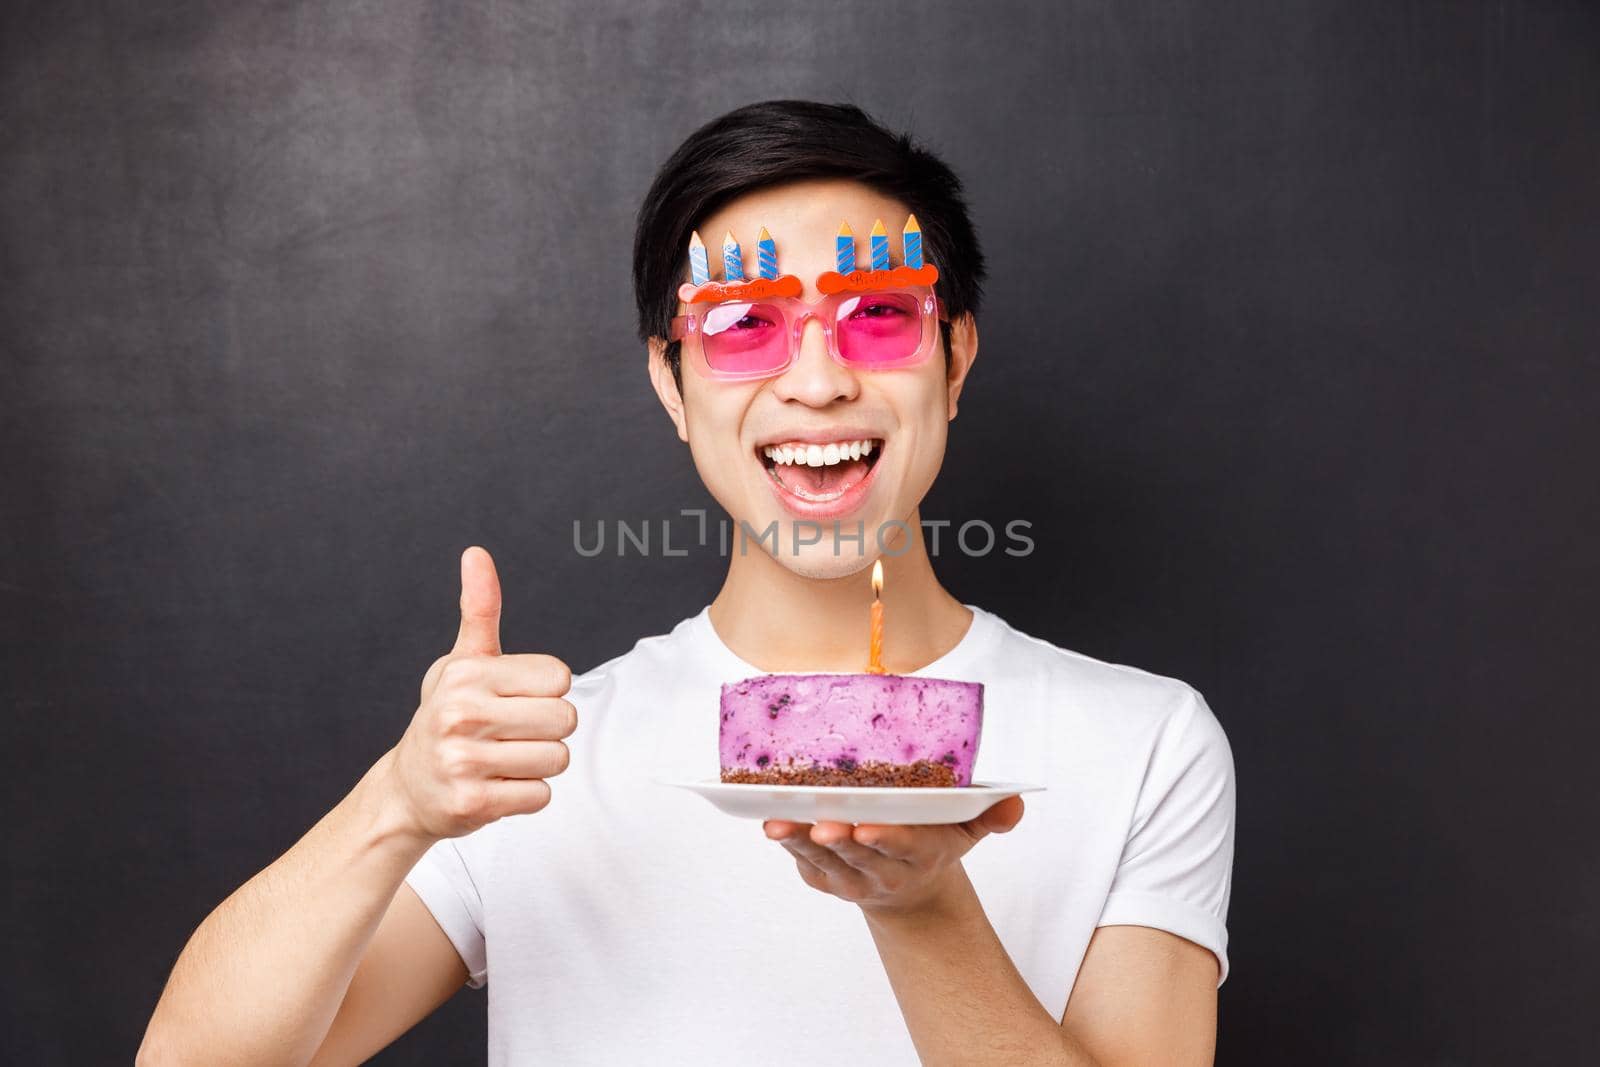 Celebration, holiday and birthday concept. Close-up portrait of excited happy b-day guy in funny party glasses, show thumb-up and hold delicious cake, making wish on lit candle, black background.